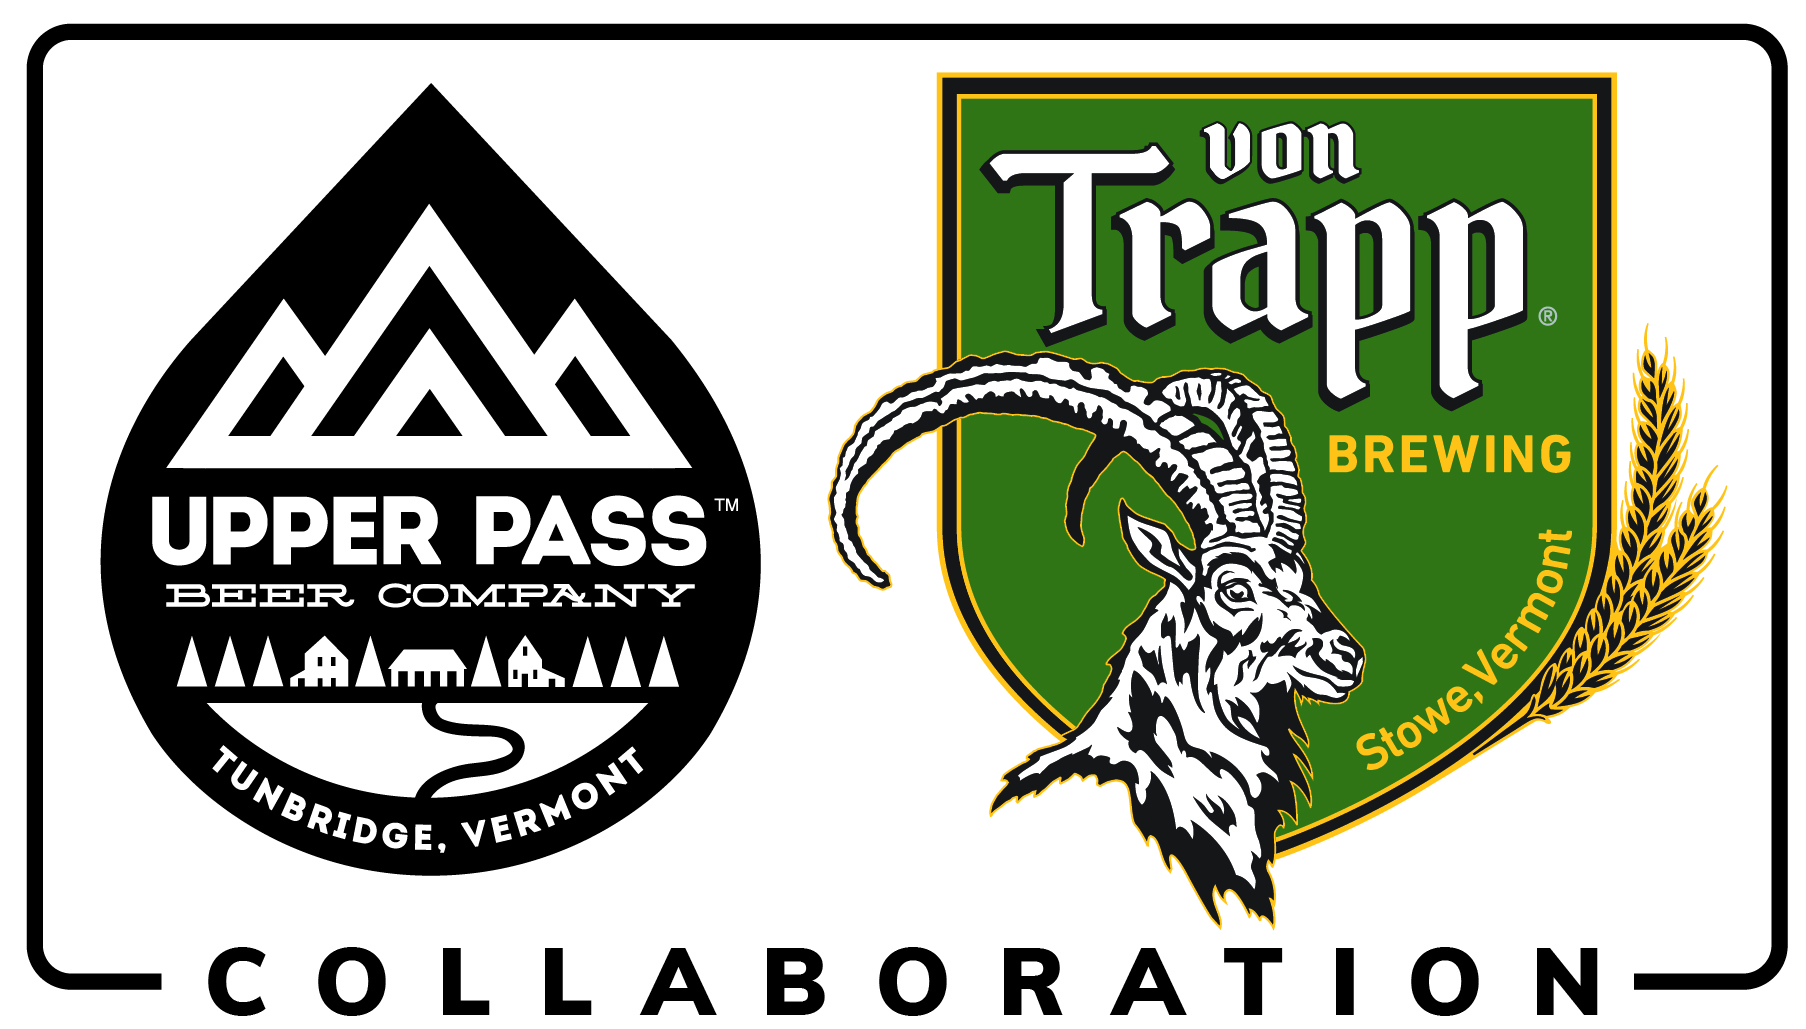 Upper Pass Beer Company and Von Trapp Brewing Collaboration